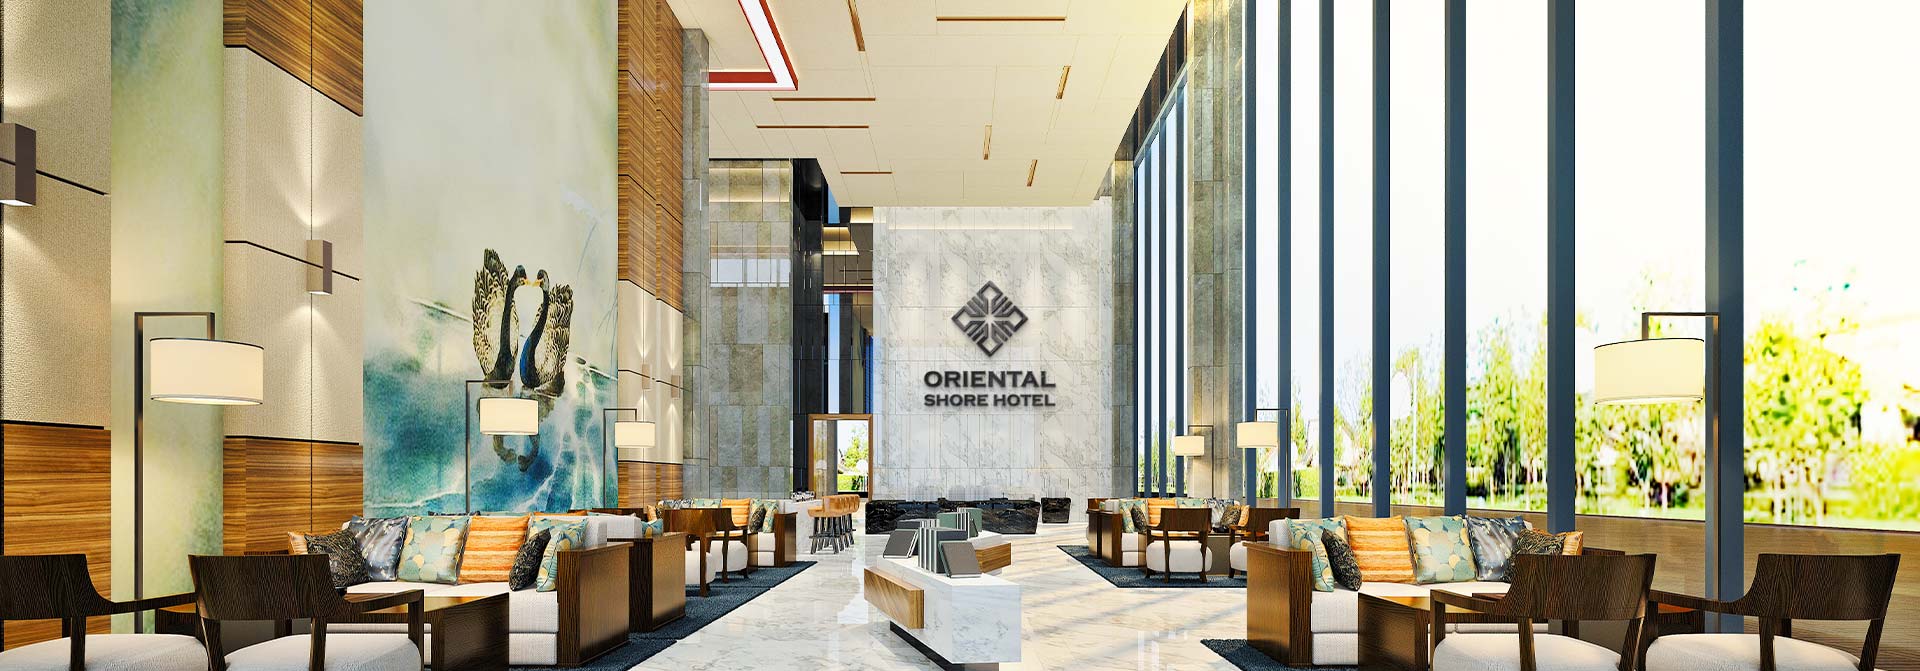 Oriental Shore Hotel branding with wall decorations and comfortable furniture